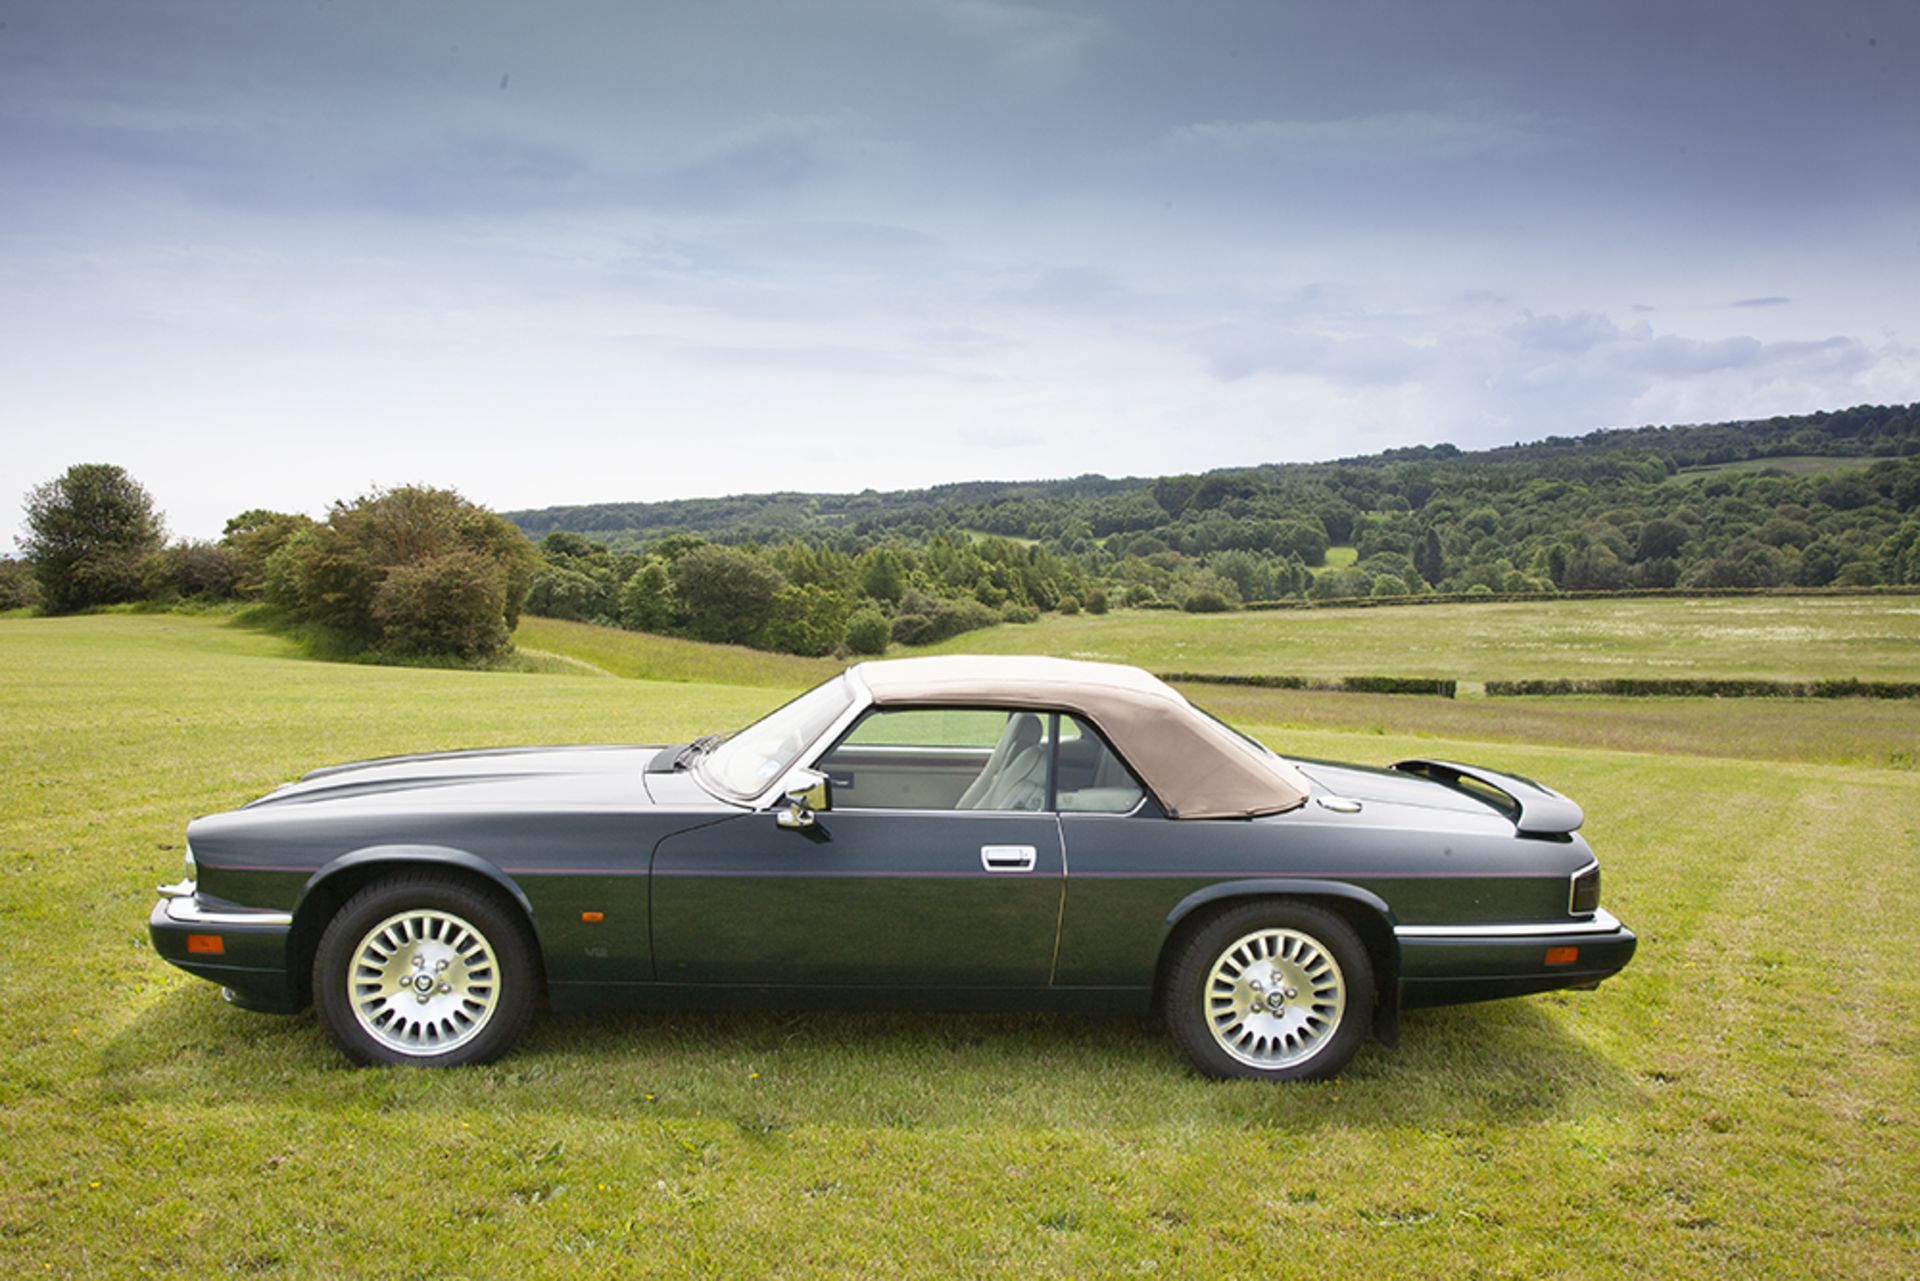 1994 Jaguar XJS V12 Convertible - in fine condition - Image 5 of 13